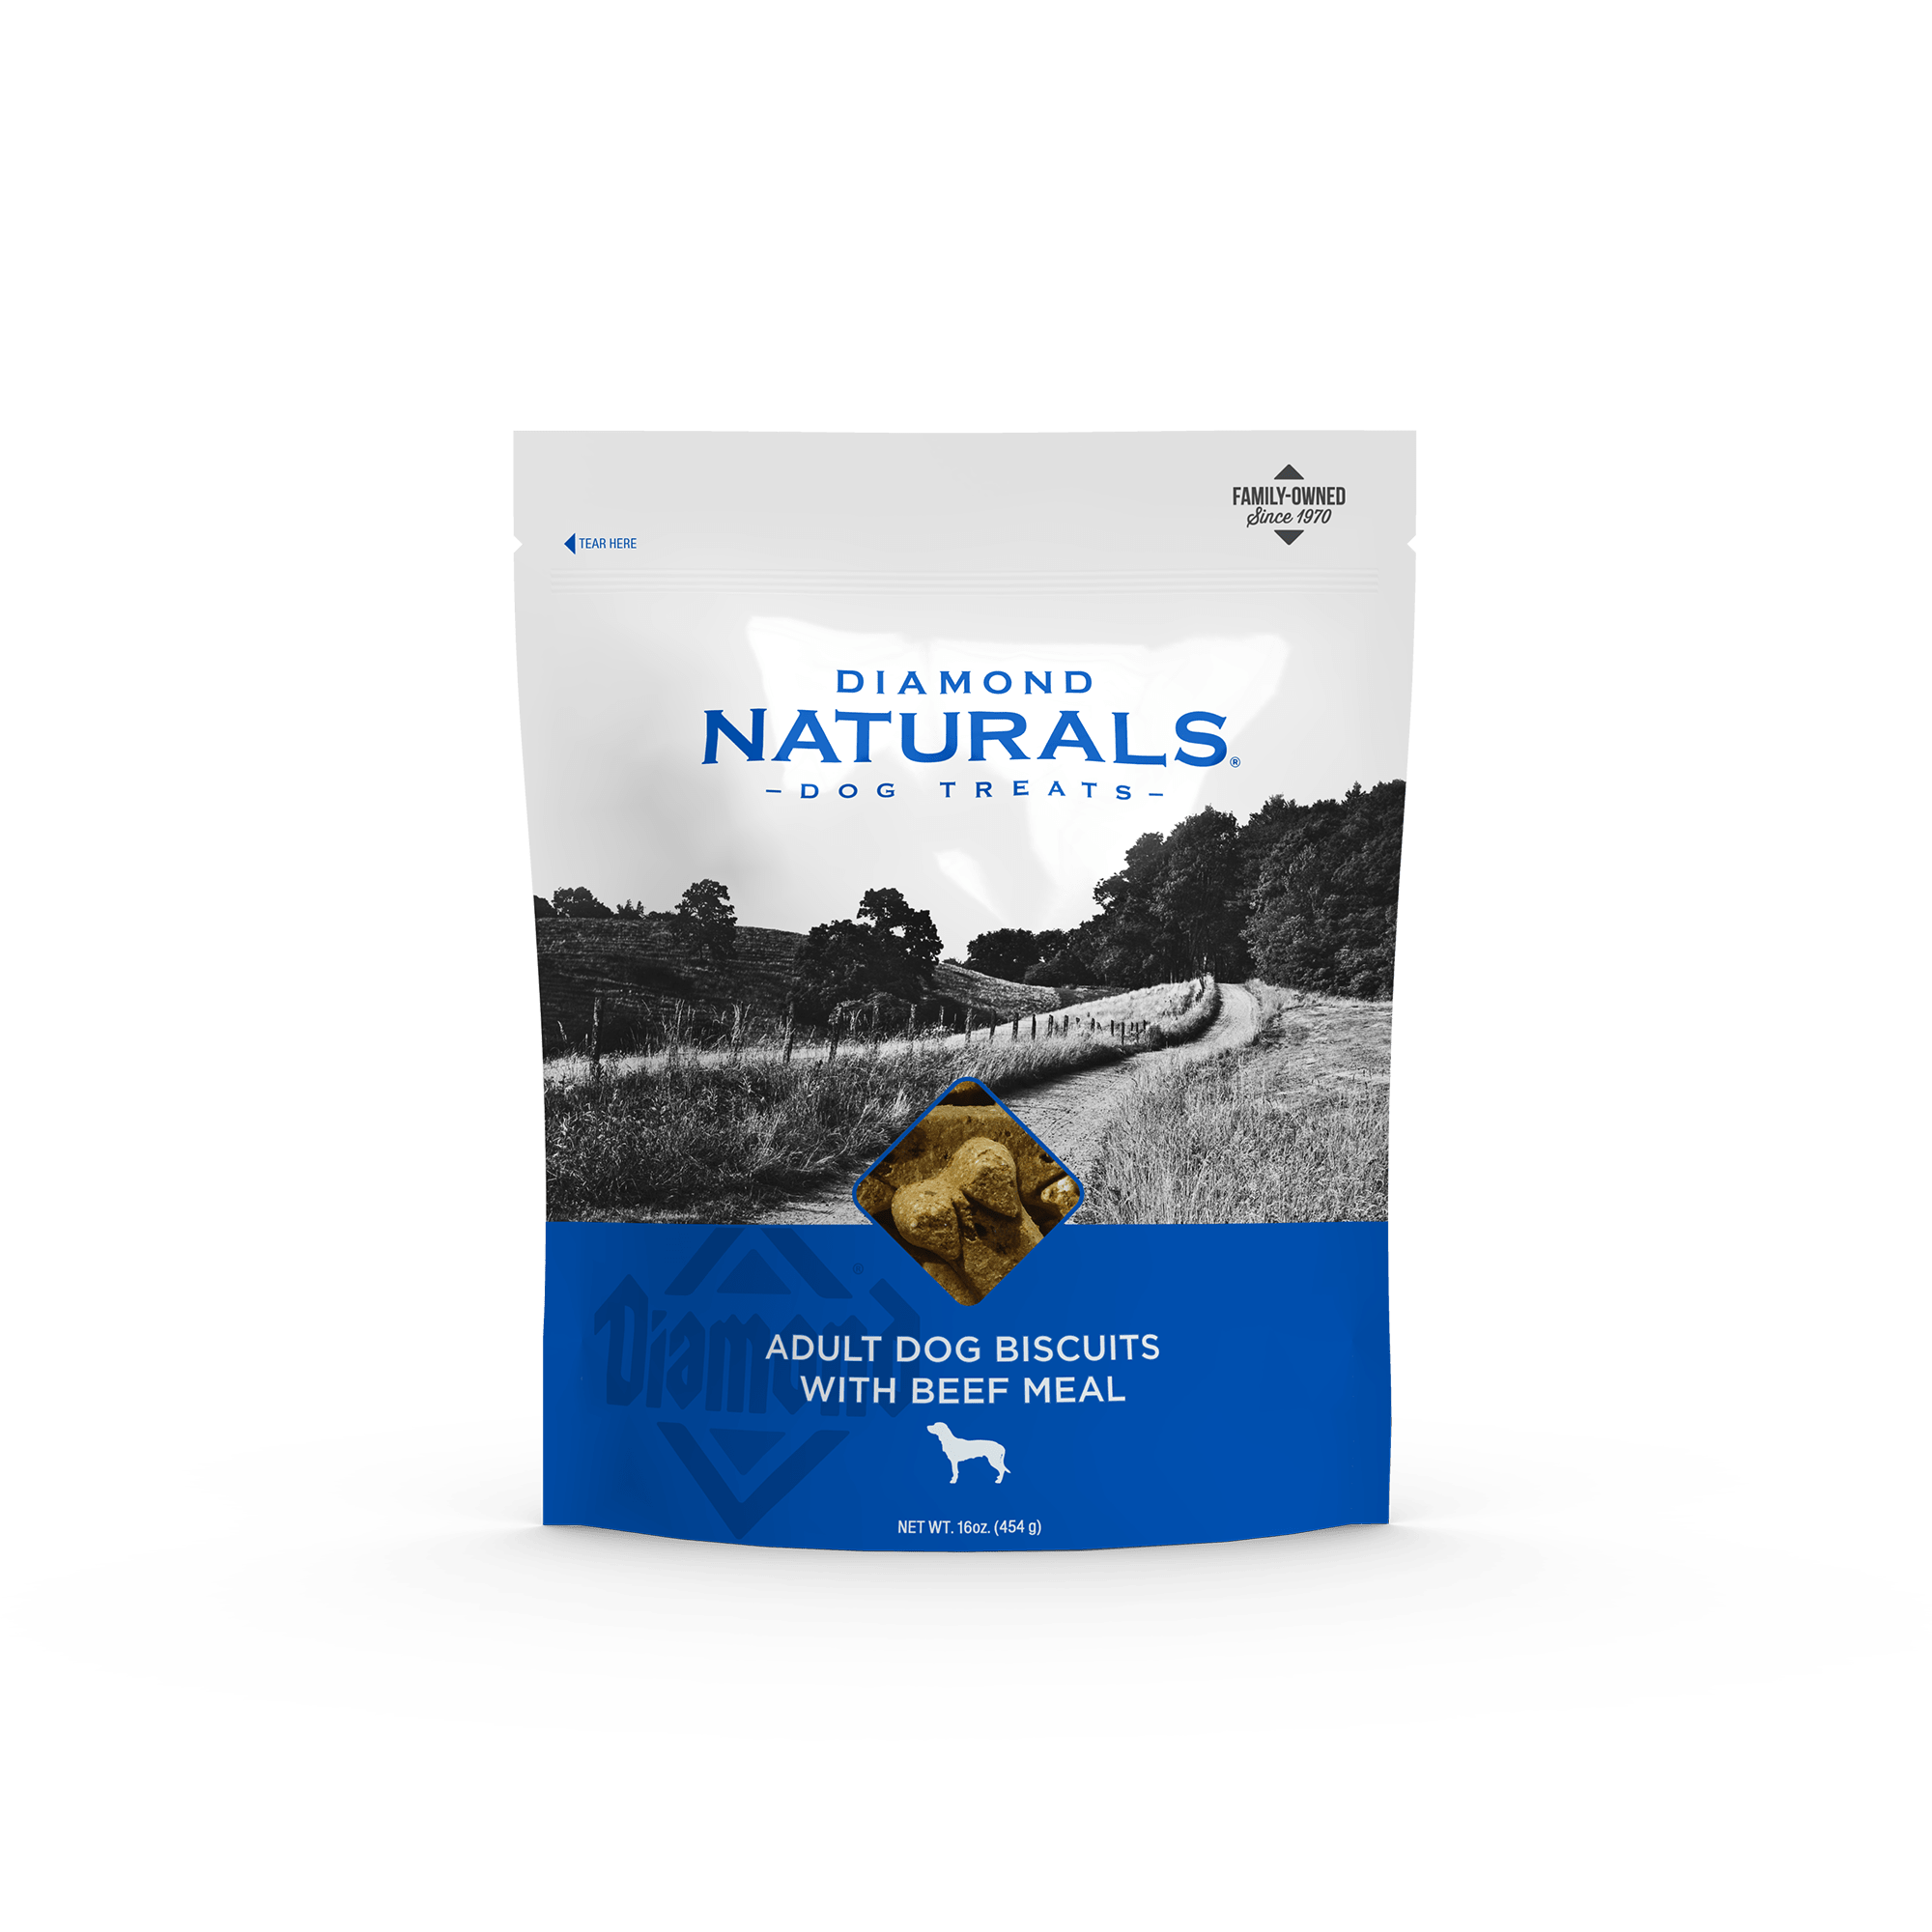 Diamond Naturals Adult Dog Biscuits with Beef Meal product packaging